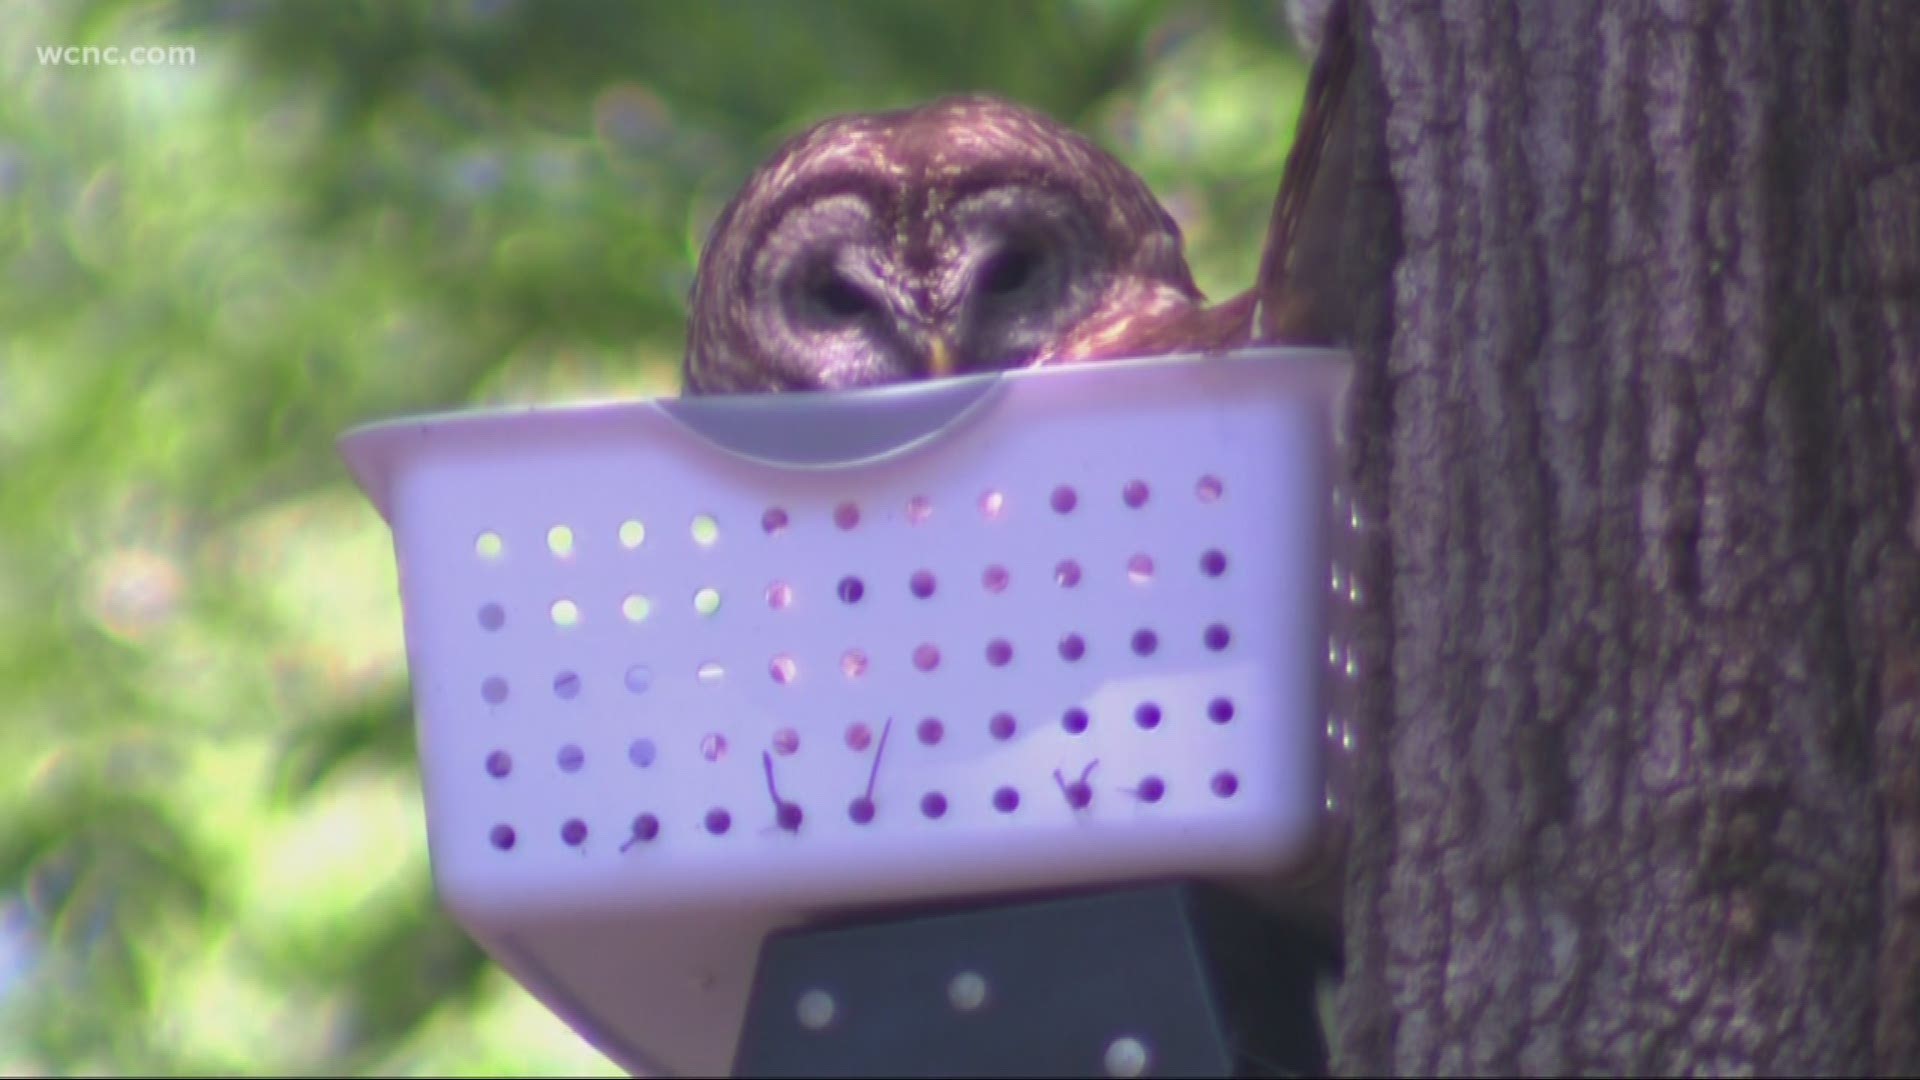 An owlet fell out of its nest, and a family wanted to save it. Then, it happened again. This time -- they called the experts.